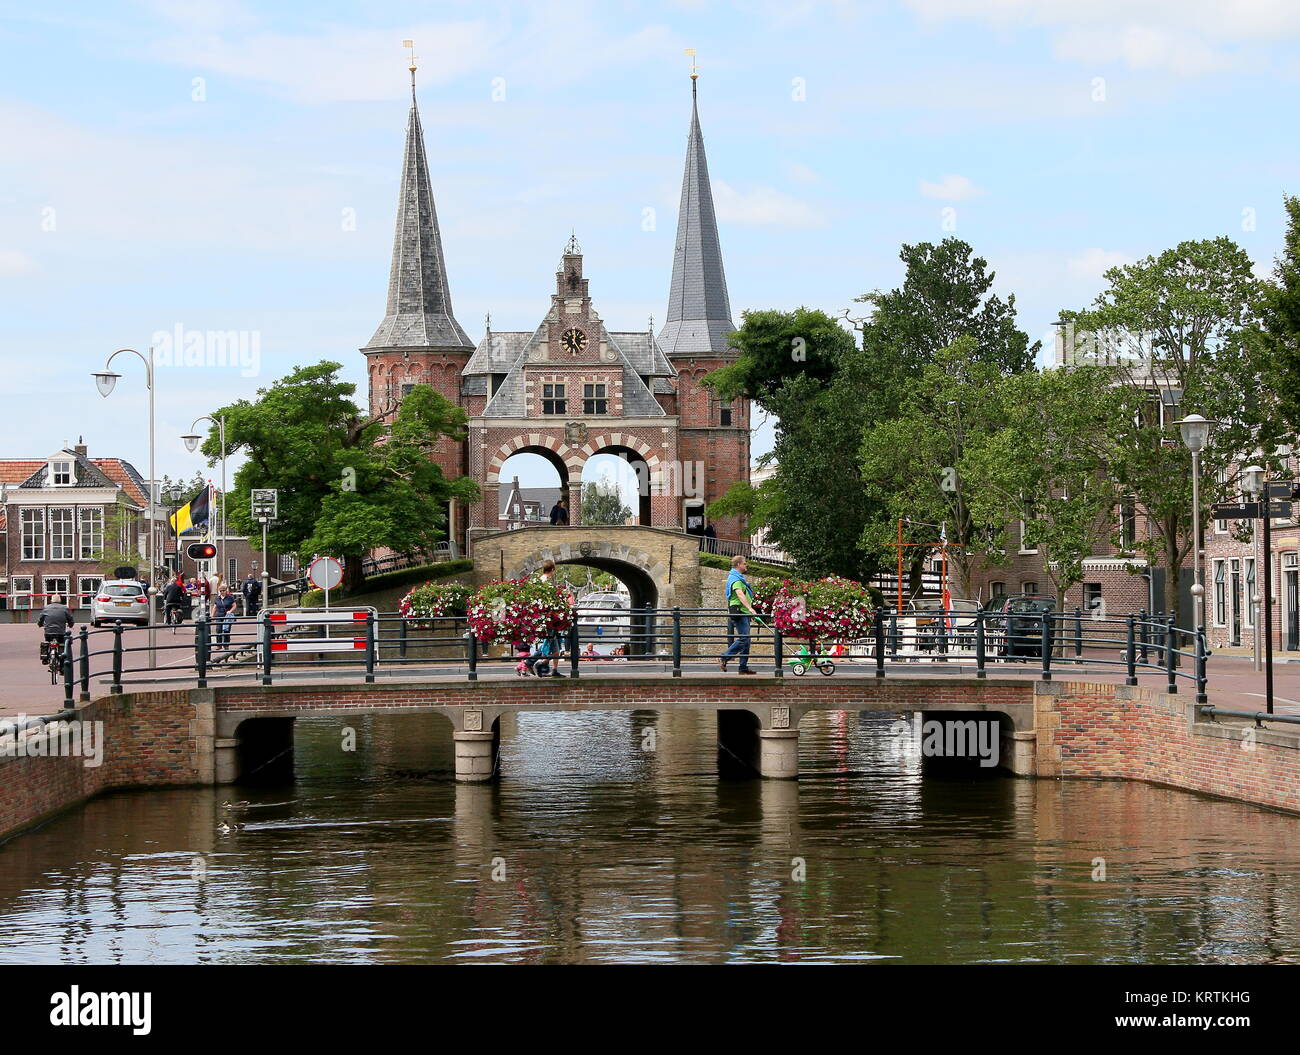 17th century Waterpoort or Water Gate in the Frisian city of Sneek, The Netherlands Stock Photo